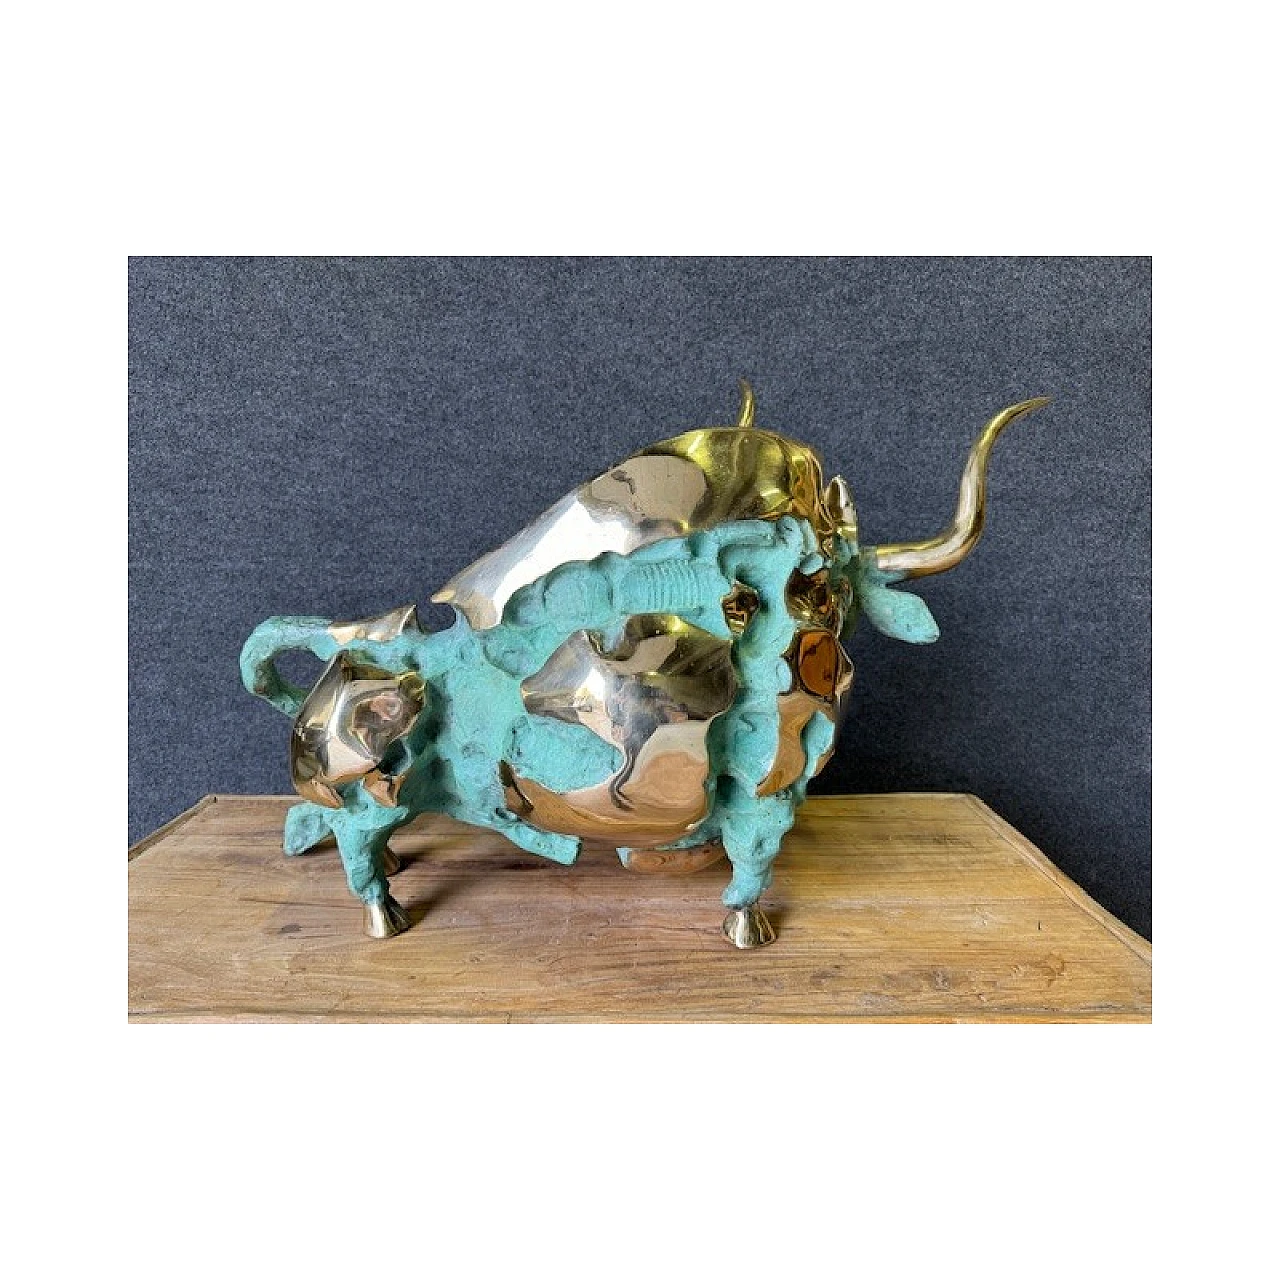 Oxidized and polished bronze bull sculpture 5